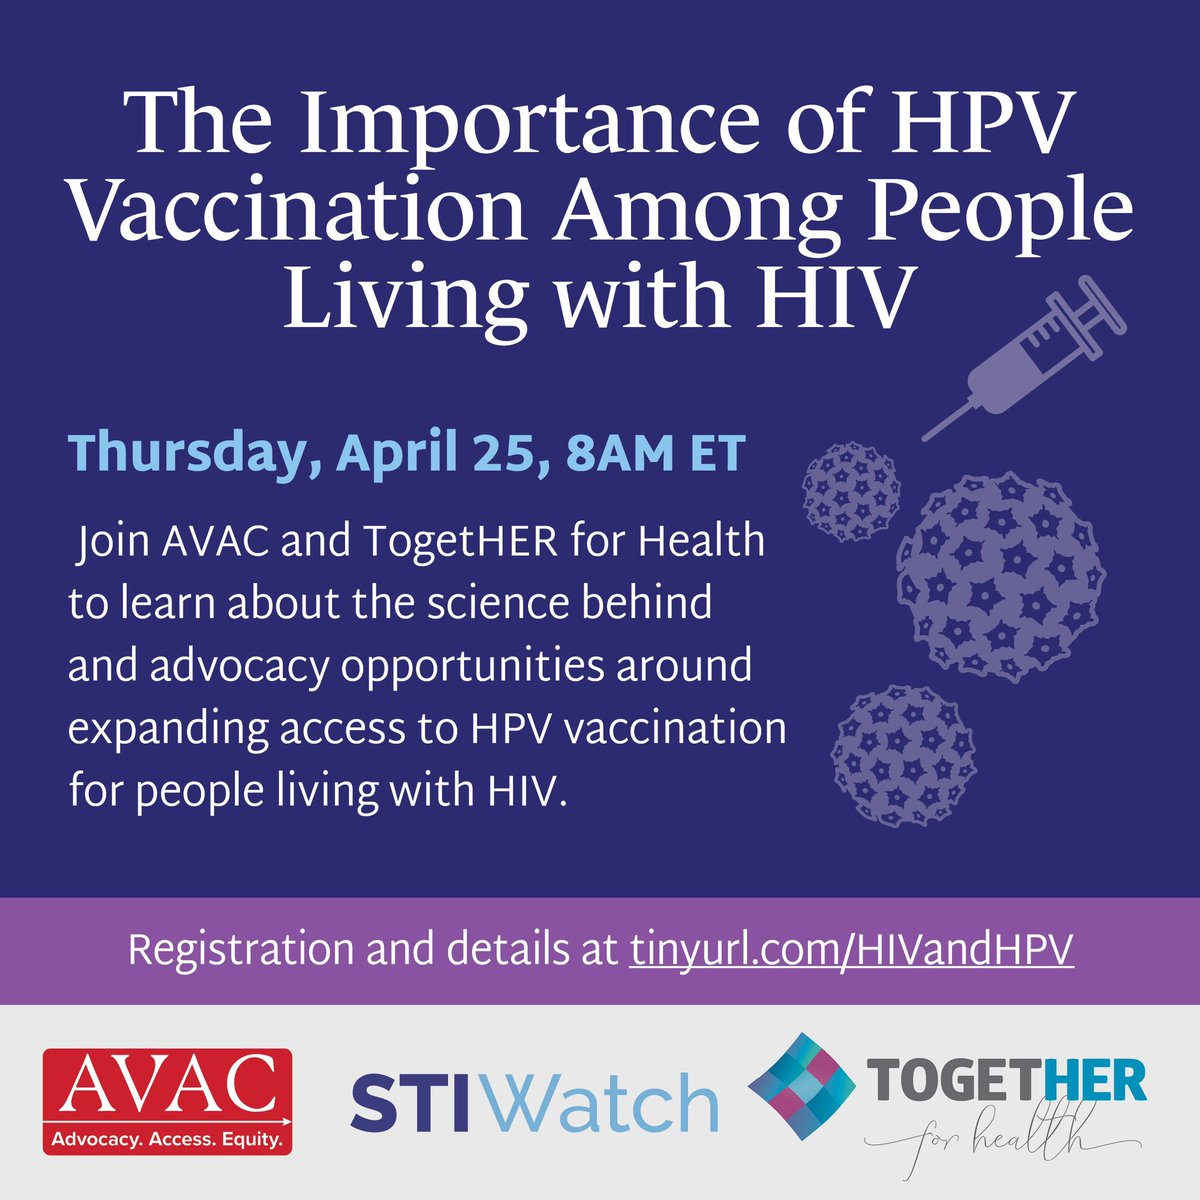 Join AVAC and @Toget_HERHealth on Thurs, April 25 at 8AM ET for a conversation on the importance of #HPV vaccinations among people living with HIV feat. experts from @KEMRI_Kenya, @hspn4 & @Jhpiego! Register here 🌟 avac.org/event/the-impo…